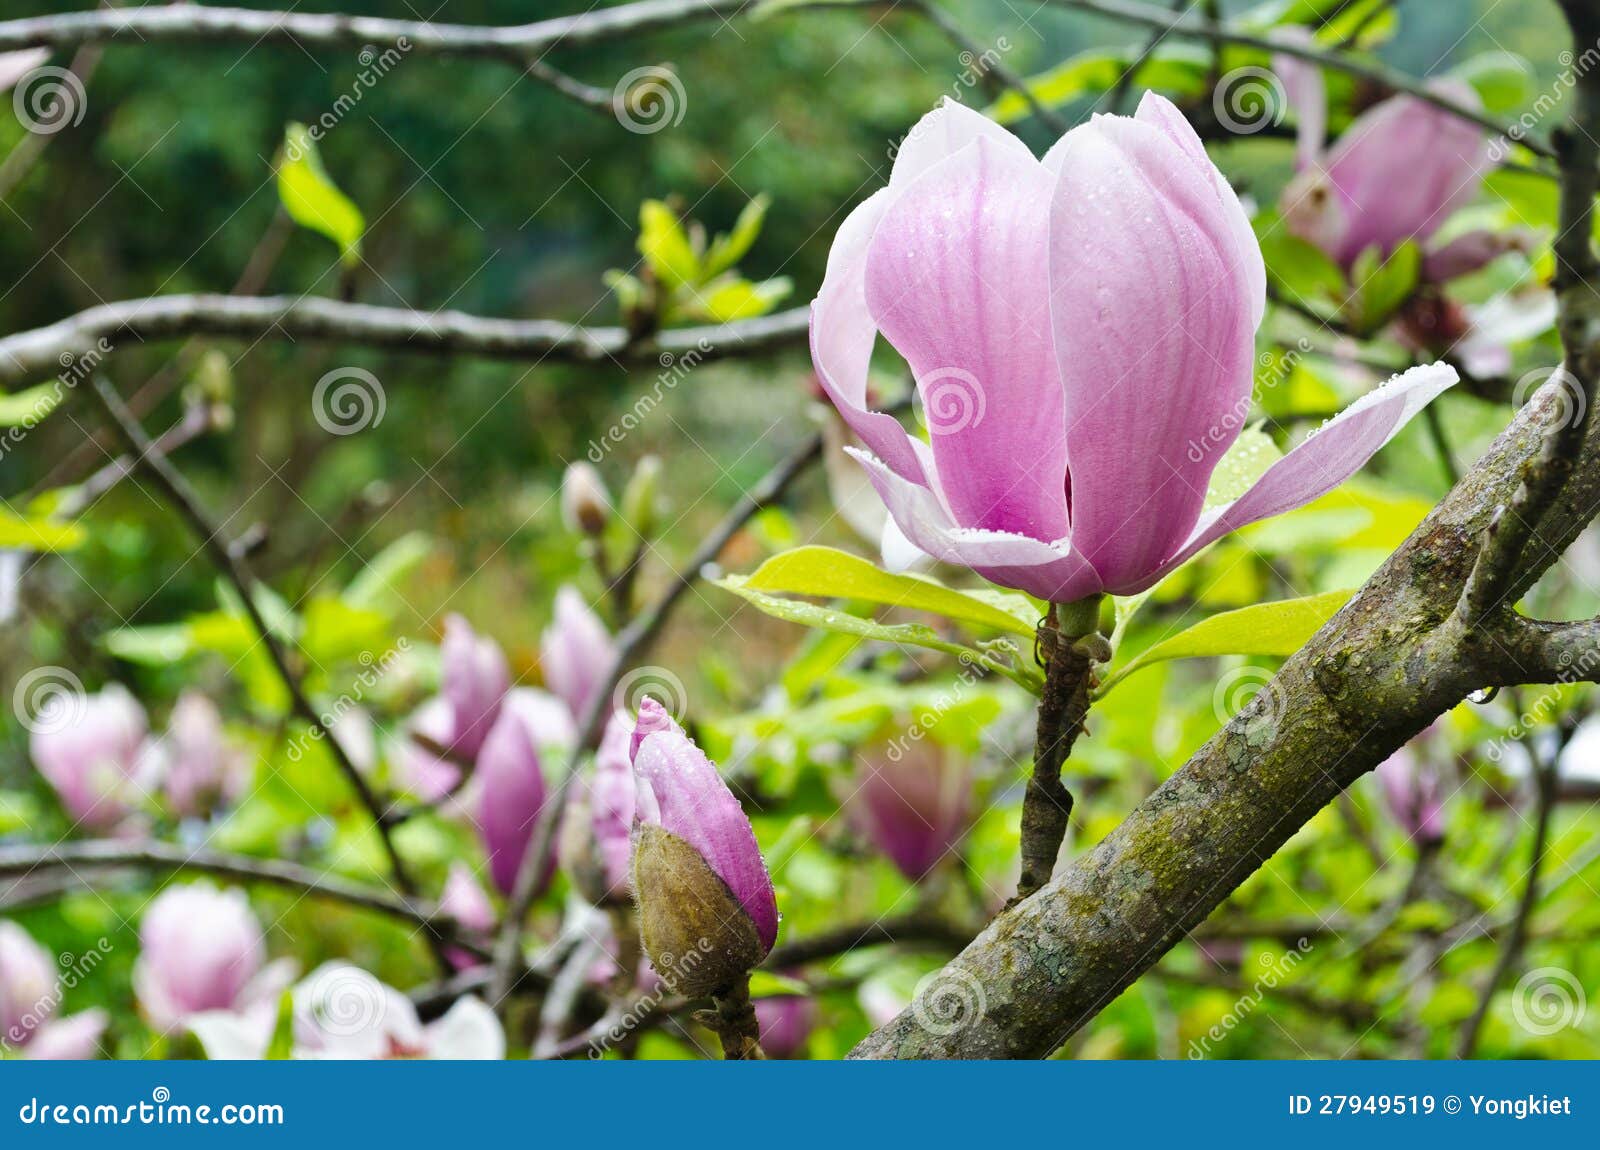 Magnolia Soulangeana in Winter Stock Image - Image of leaf, blooming ...